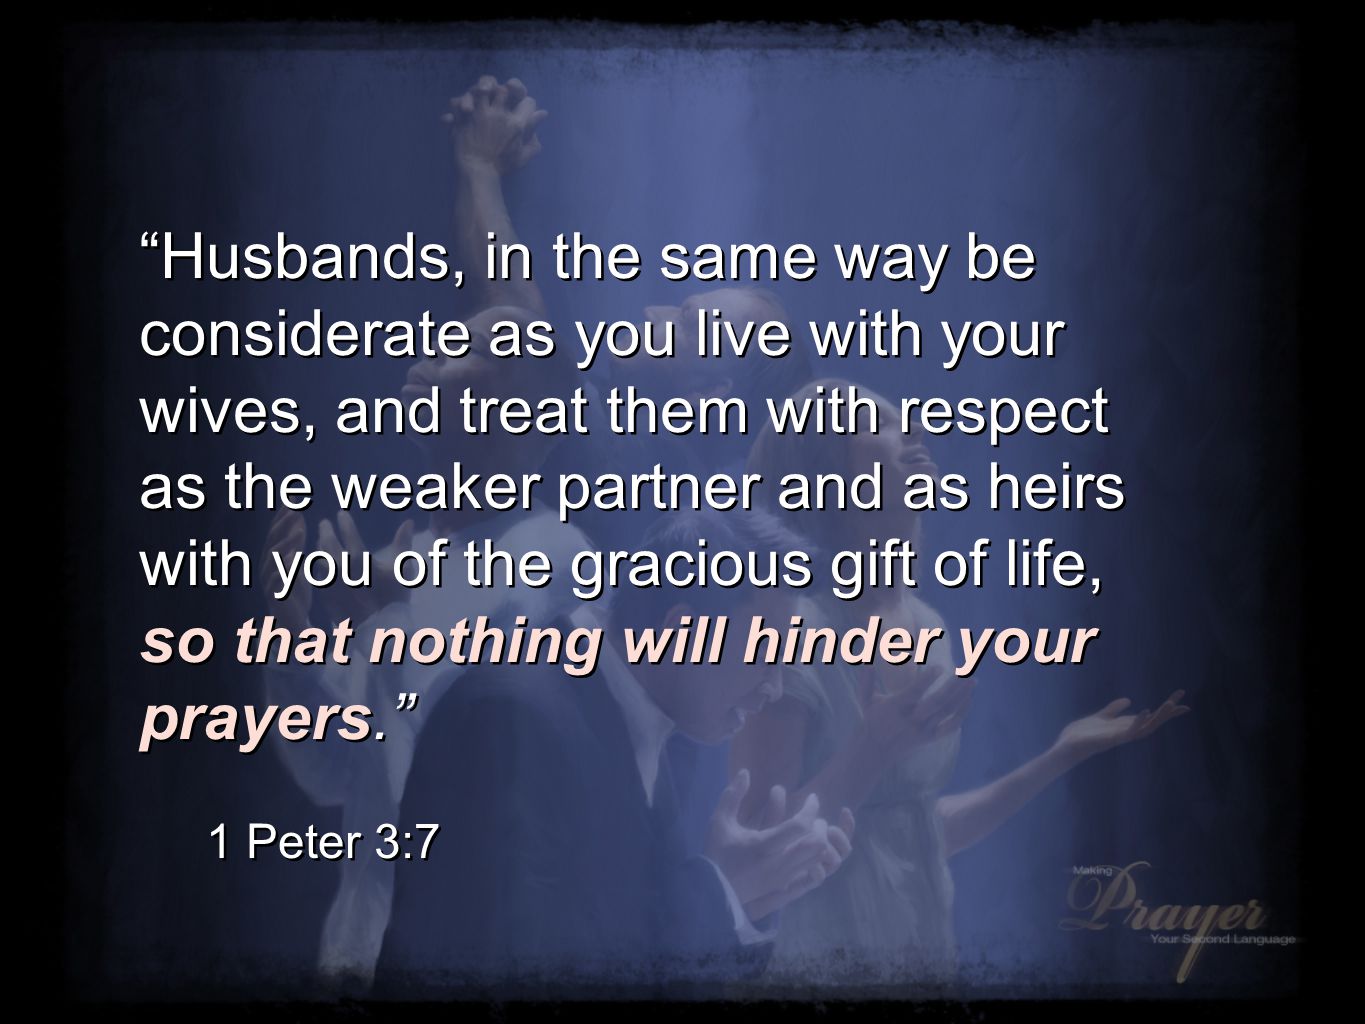 Husbands, in the same way be considerate as you live with your wives, and treat them with respect as the weaker partner and as heirs with you of the gracious gift of life, so that nothing will hinder your prayers. 1 Peter 3:7 Husbands, in the same way be considerate as you live with your wives, and treat them with respect as the weaker partner and as heirs with you of the gracious gift of life, so that nothing will hinder your prayers. 1 Peter 3:7